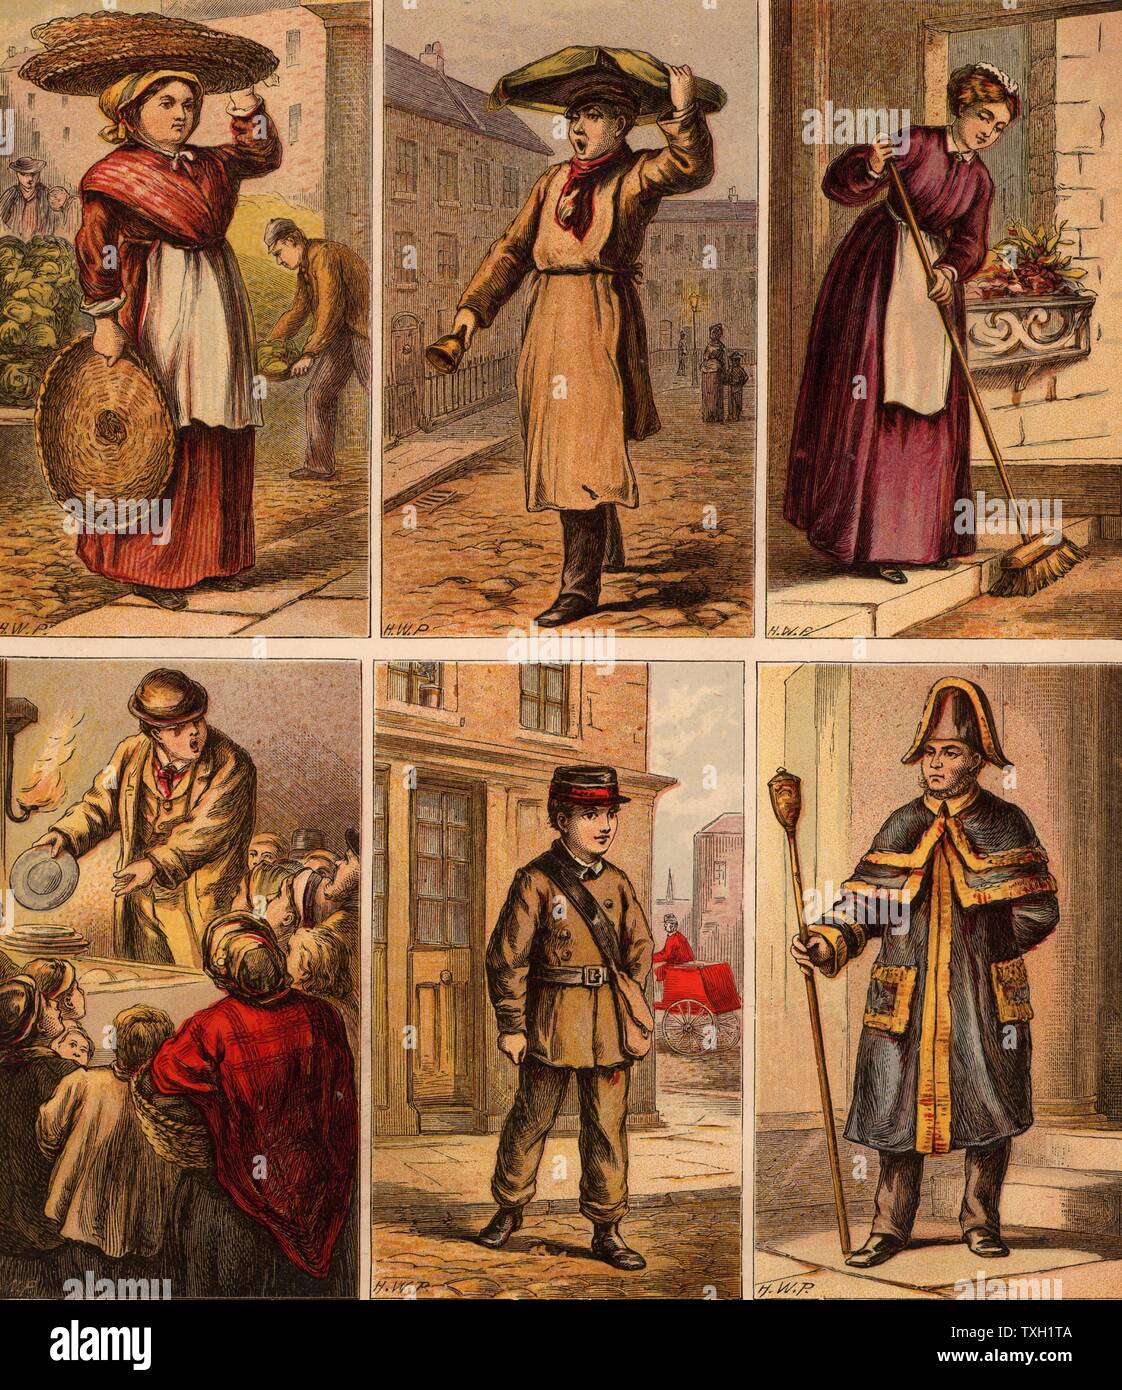 London street scenes. Fishseller: Muffin Man (with bell): Housemaid: Huckster selling crockery: Telegram boy. A Beadle.  Illustrations by Horace William Petherick (1839-1919) for a children's book published London c1875. Stock Photo